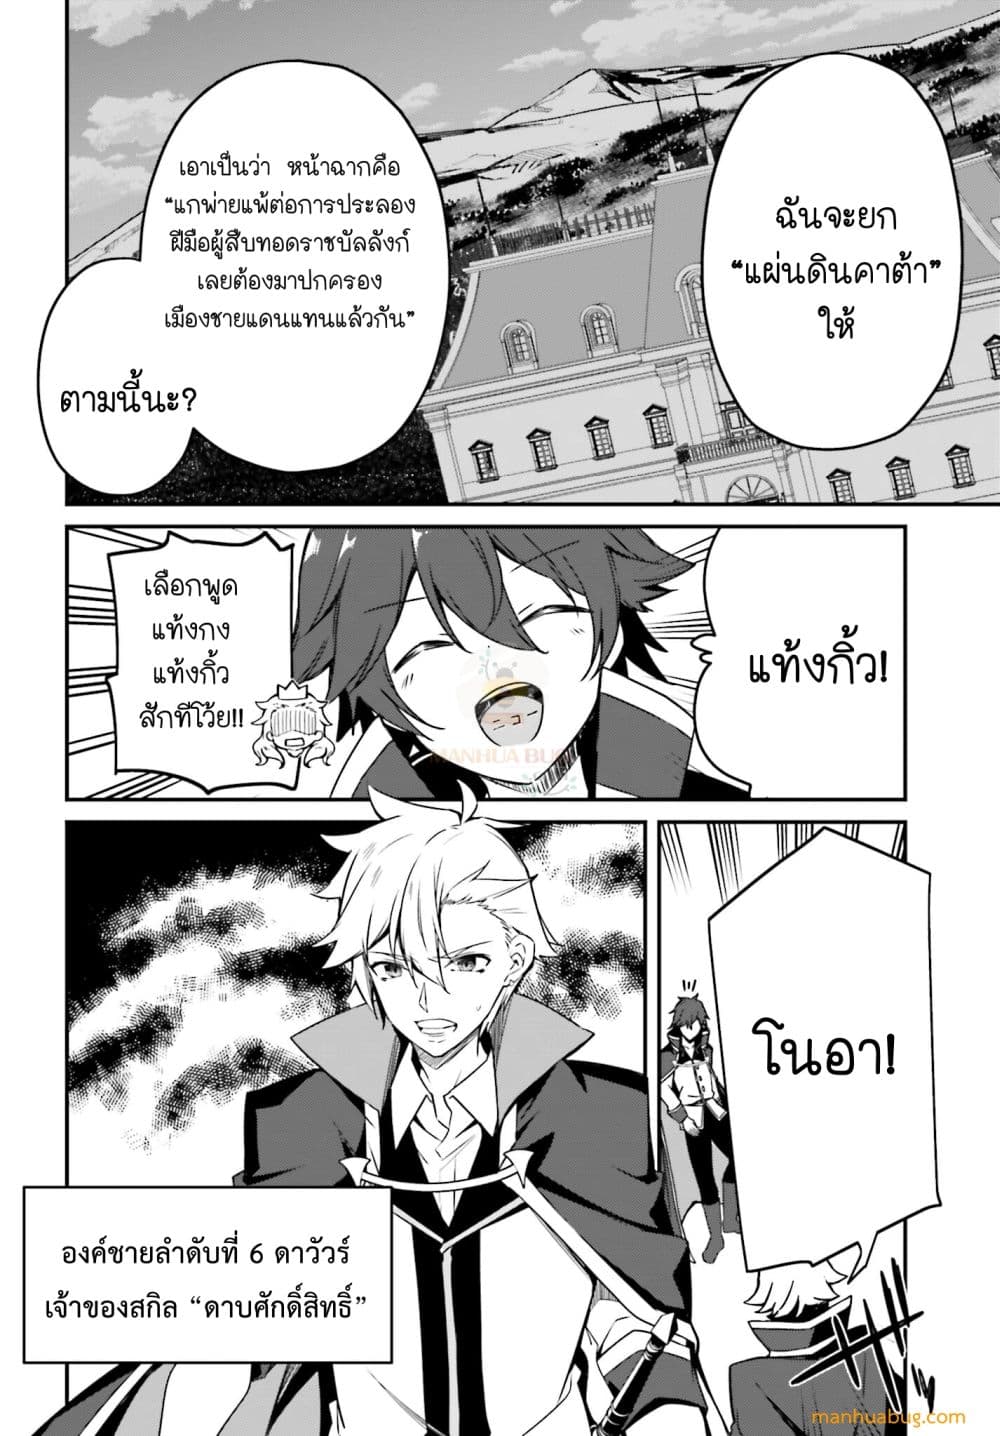 THE INCOMPETENT PRINCE WHO HAS BEEN BANISHED WANTS TO HIDE HIS ABILITIES~ ตอนที่ 1 (7)